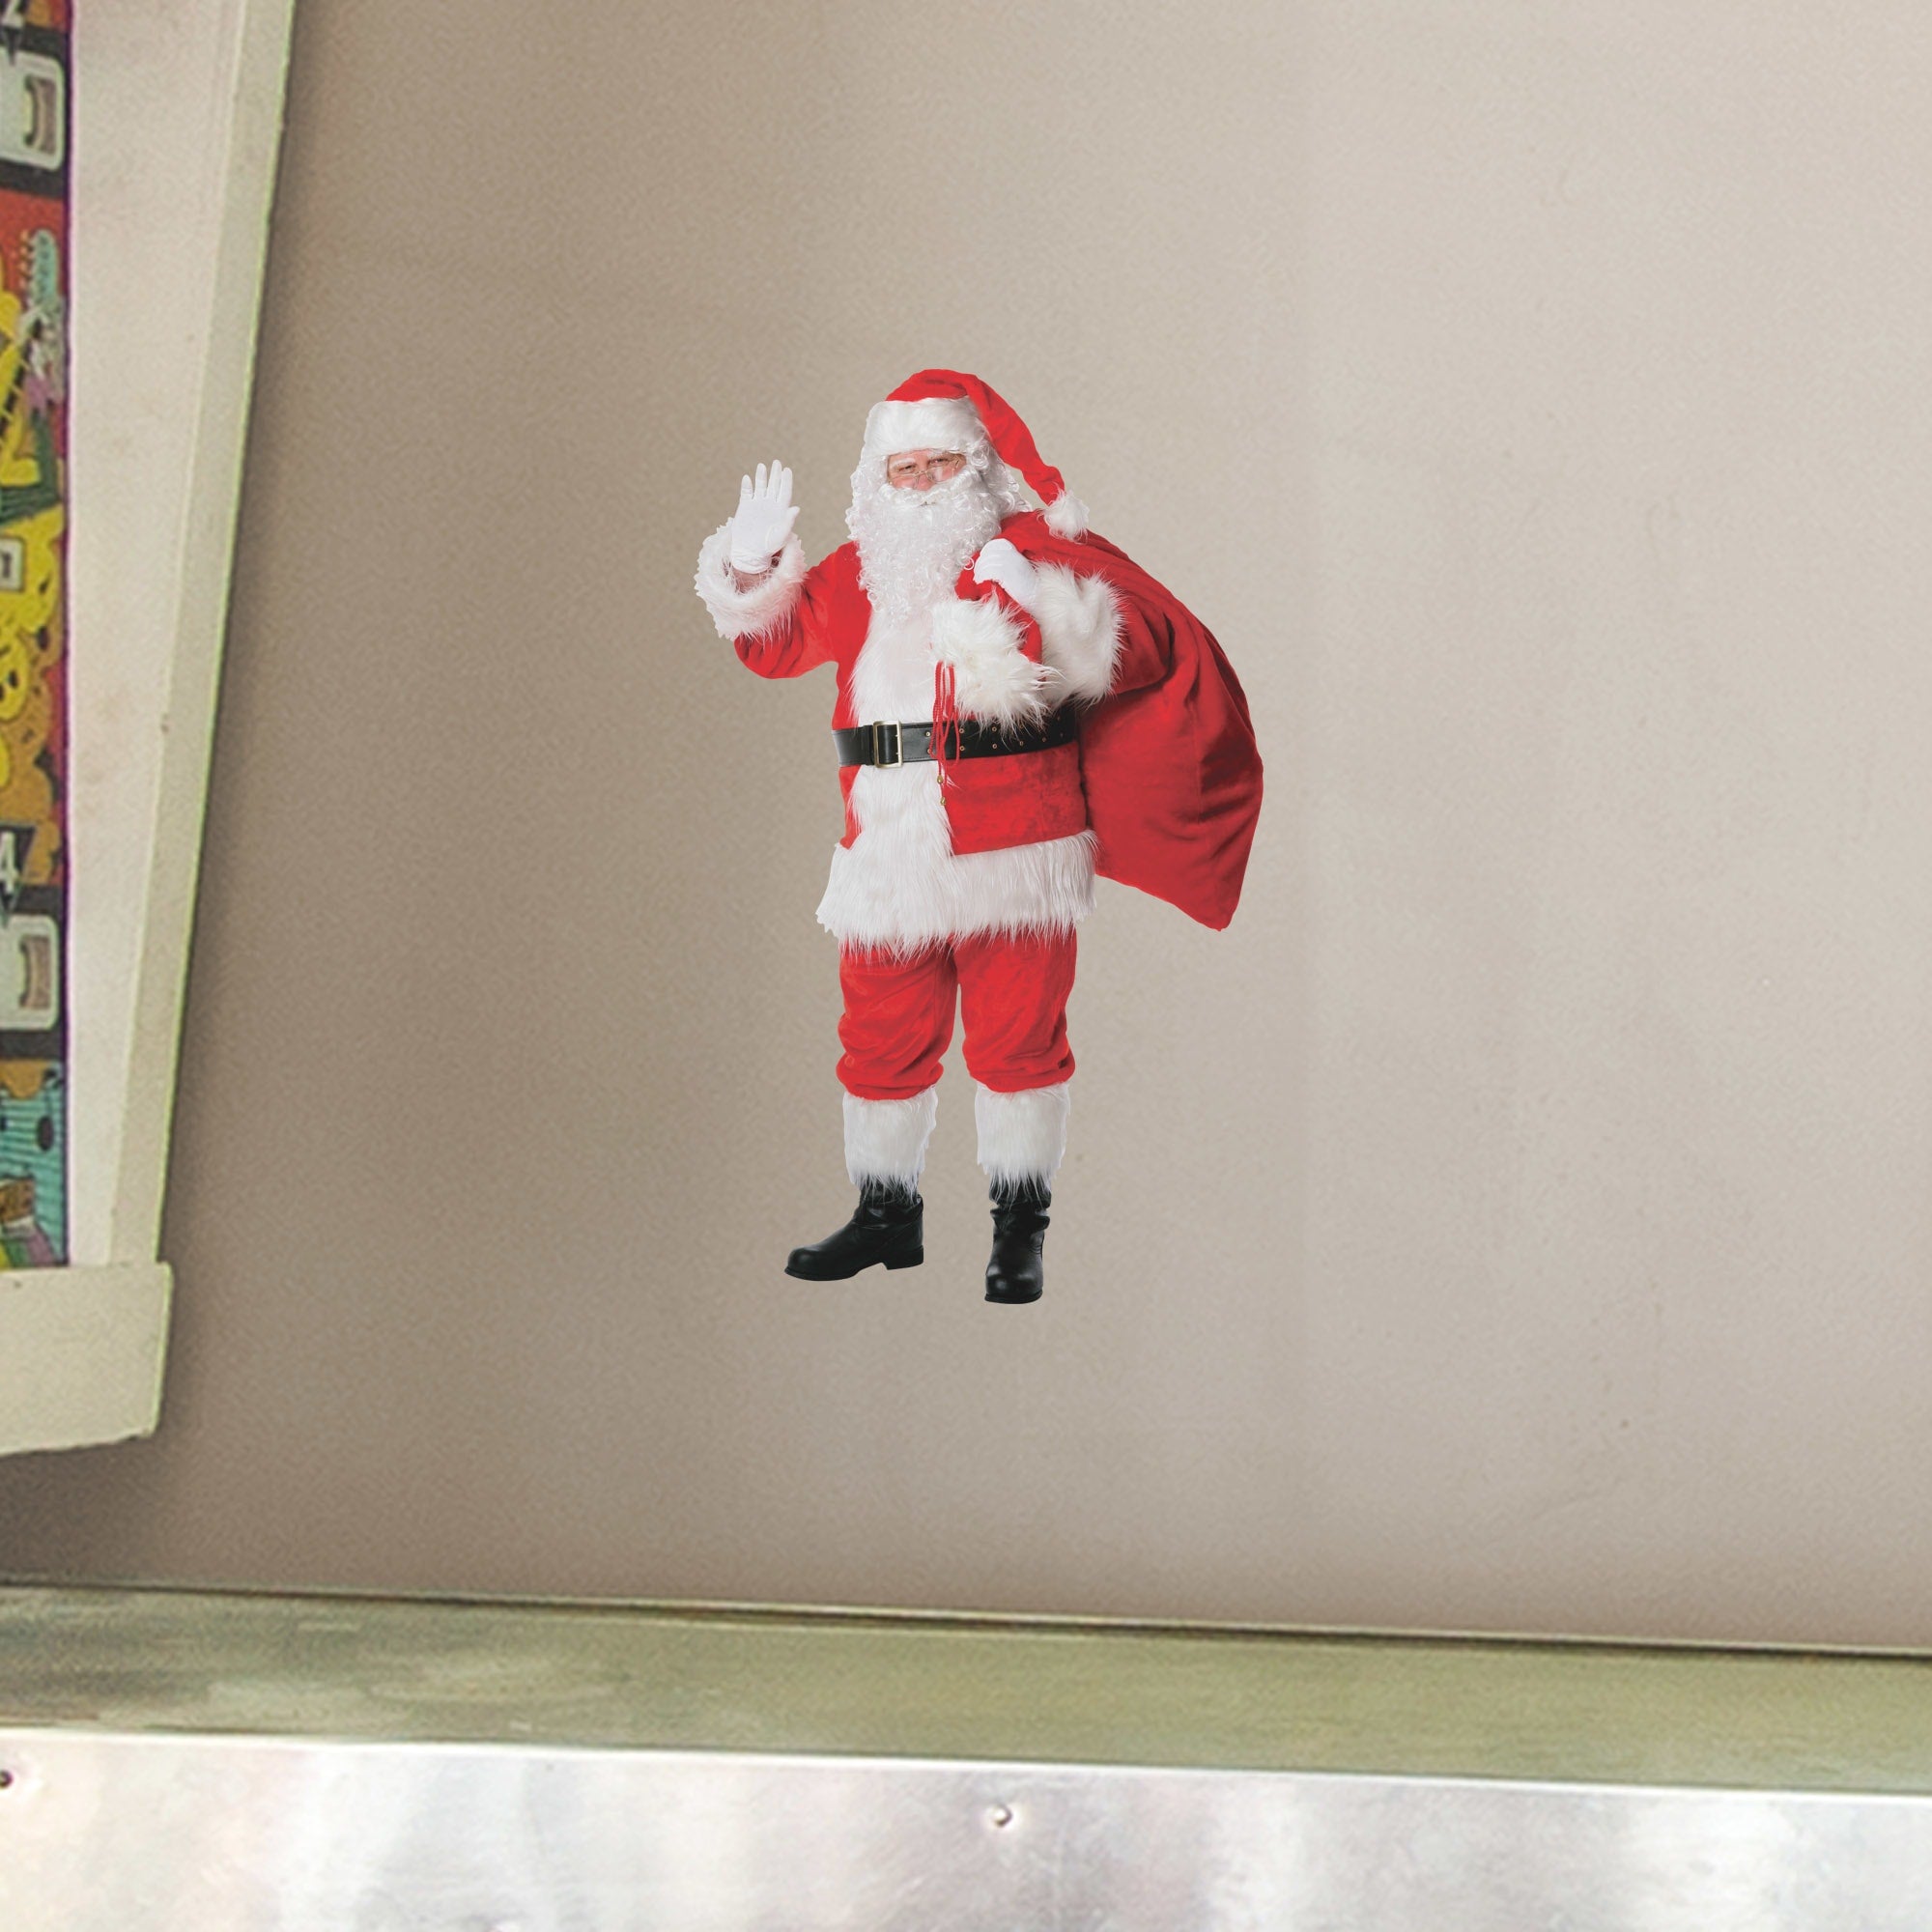 Santa Claus - Removable Wall Decal Large by Fathead | Vinyl